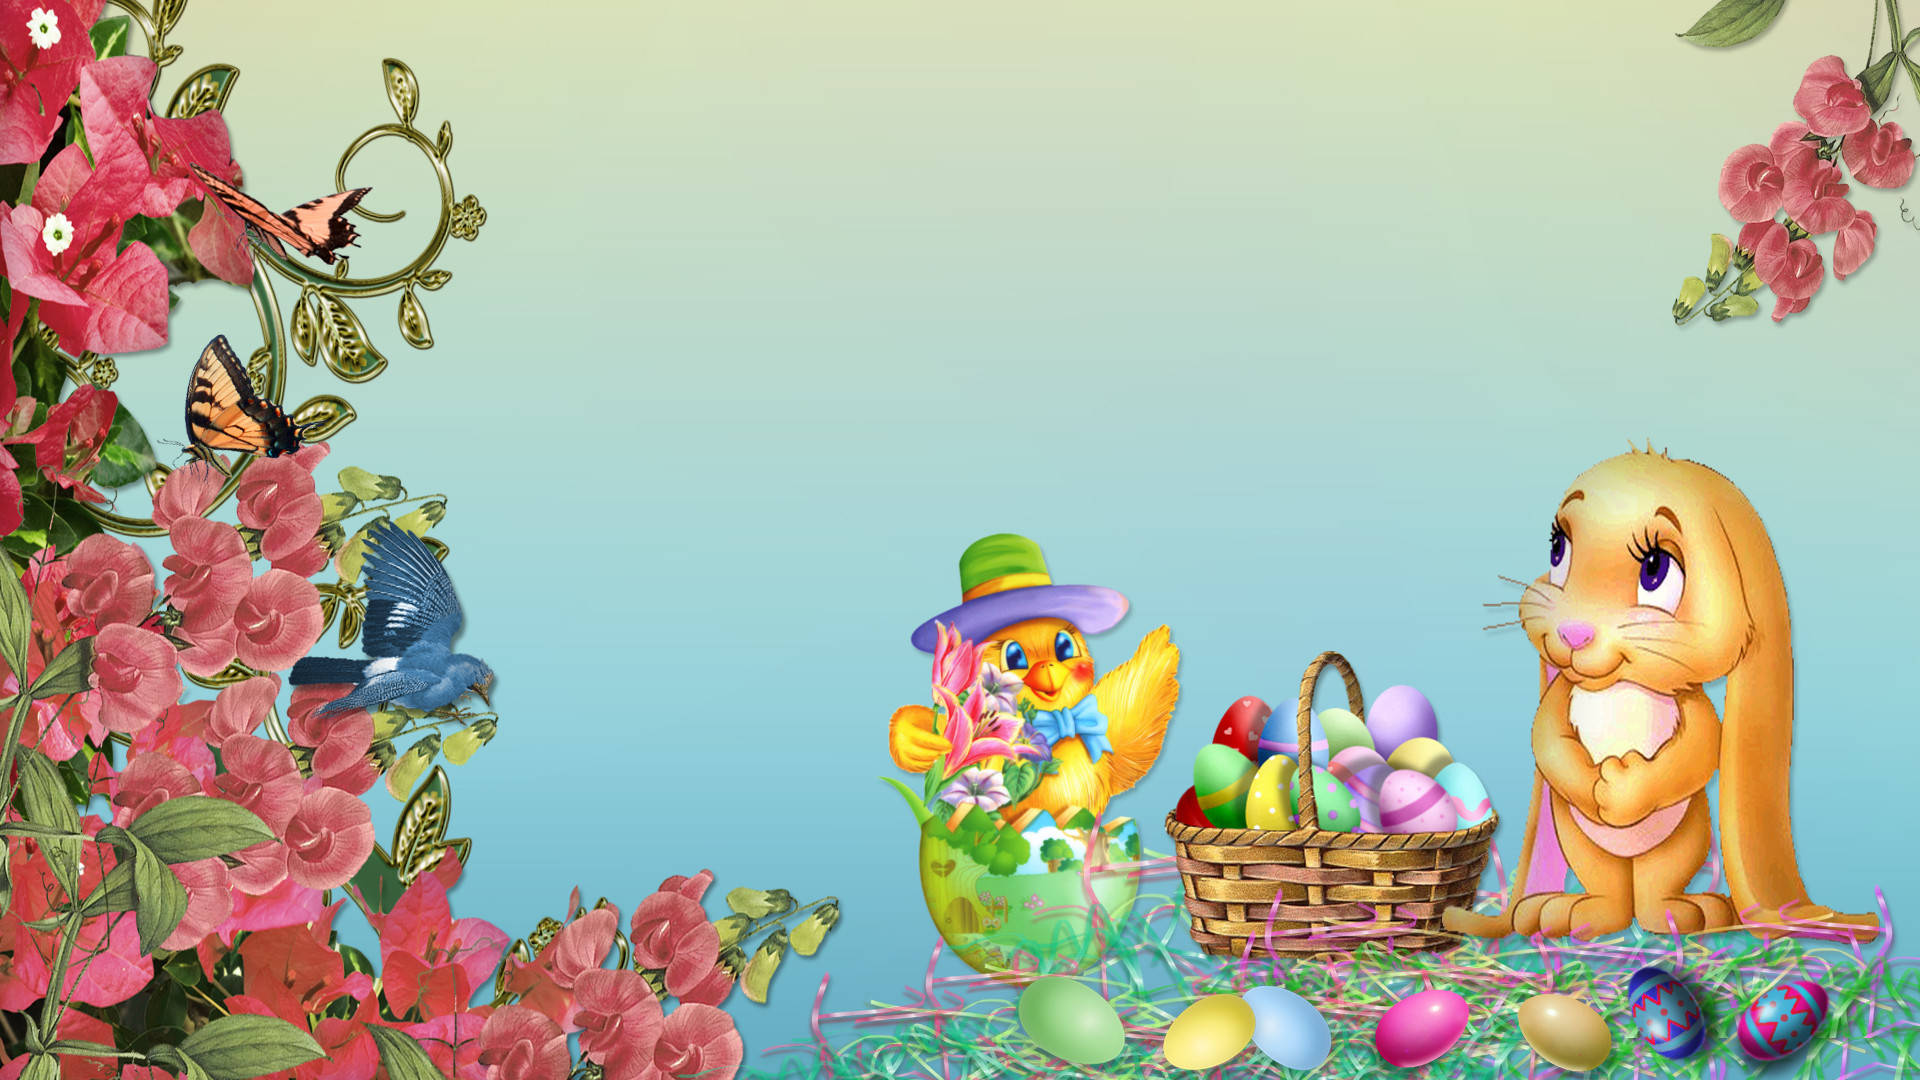 Happy Easter Bunny And Chicks Cartoon With Eggs Wallpaper